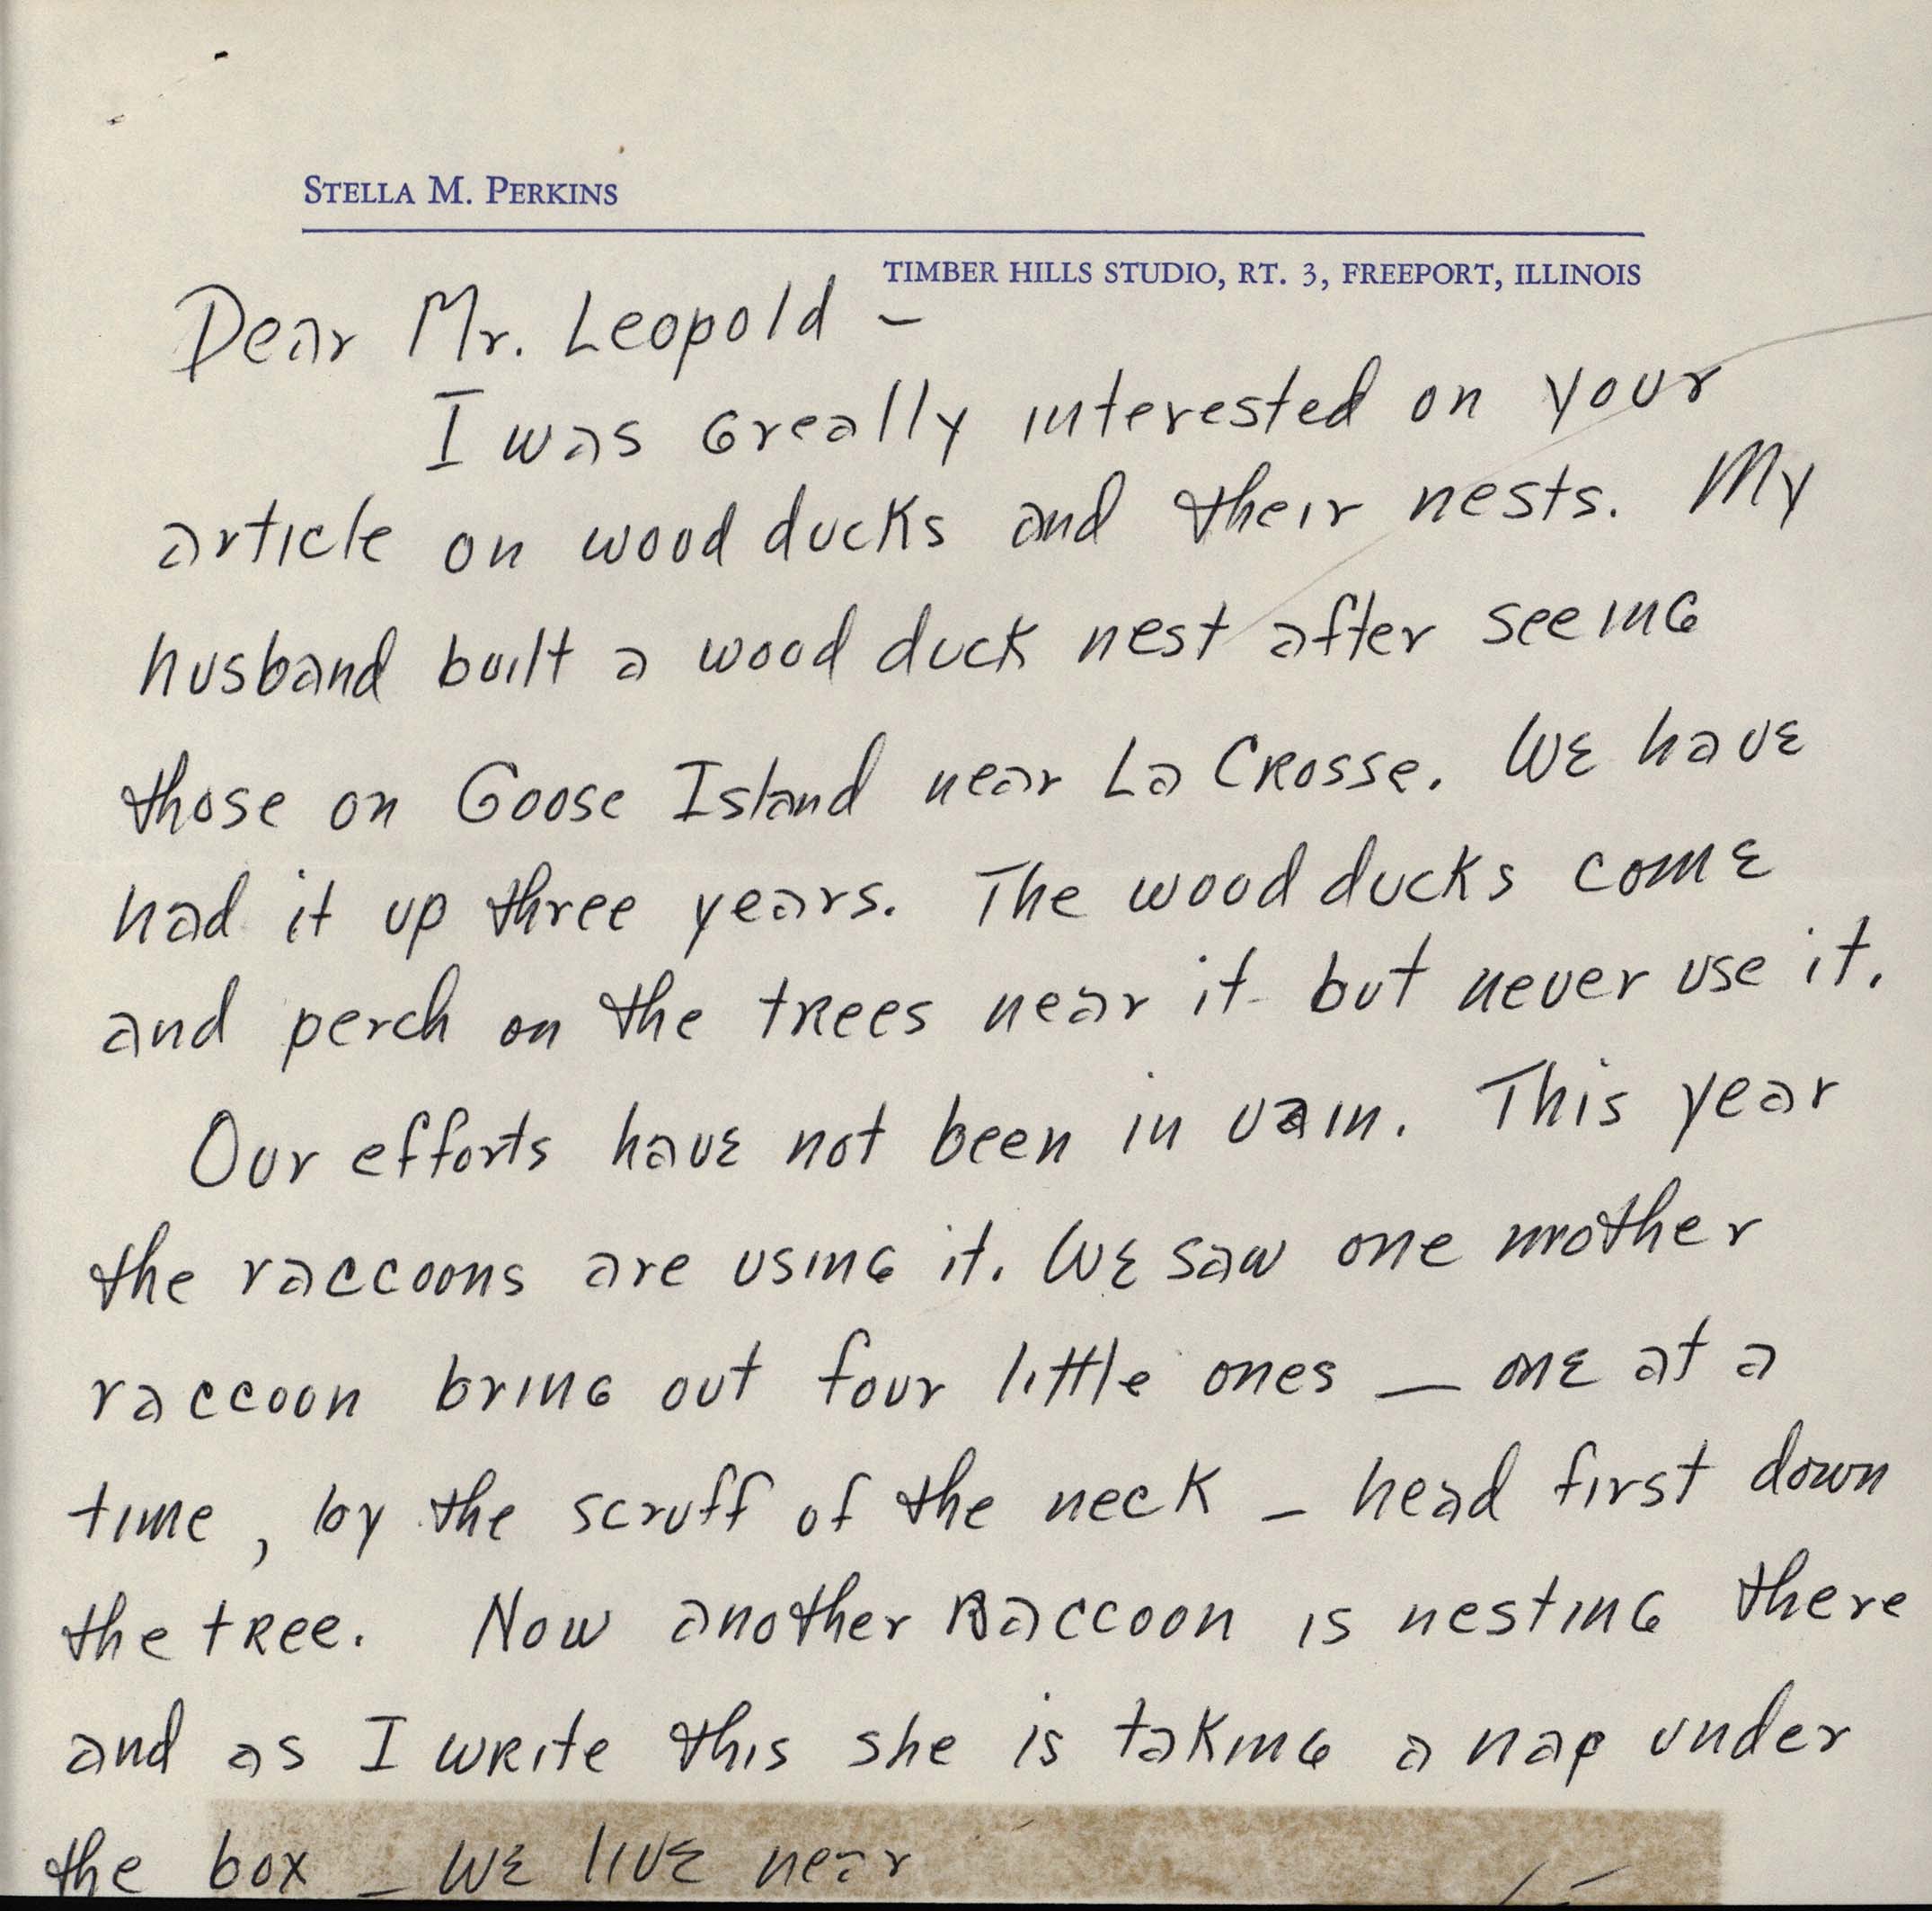 Stella M. Perkins letter to Frederic Leopold regarding Wood Duck houses 